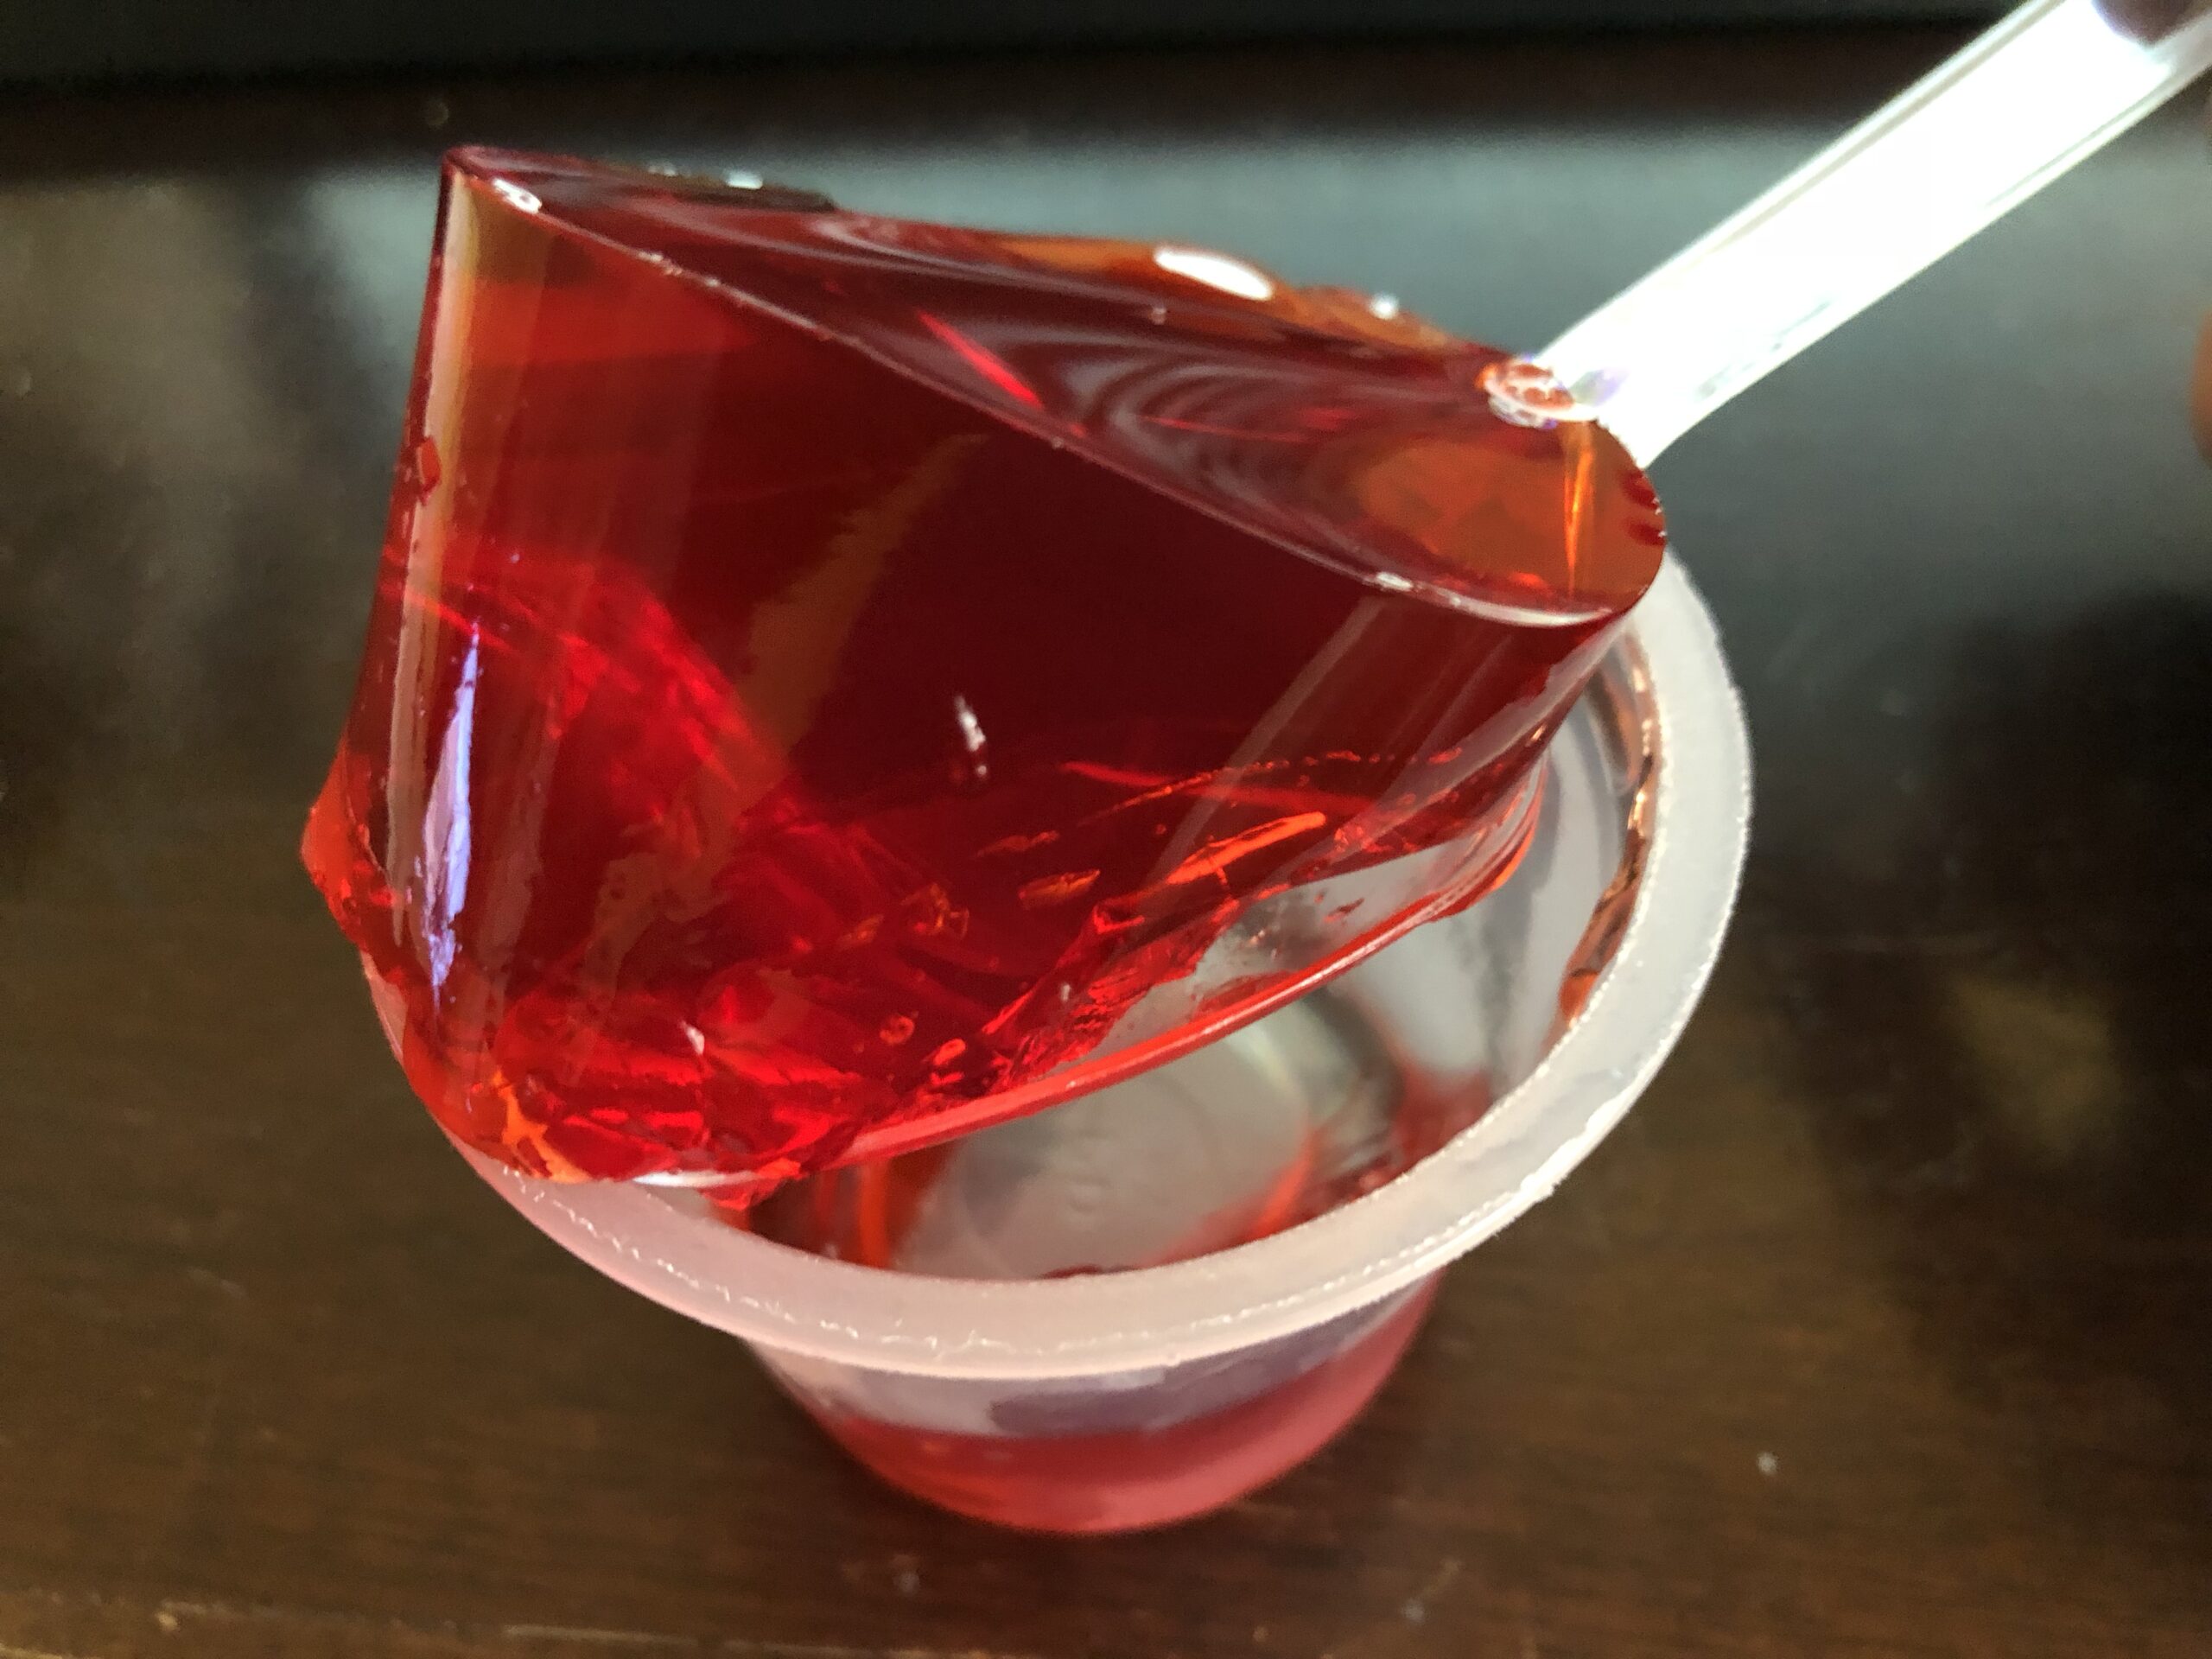 Find Out if Jello Contains Pork